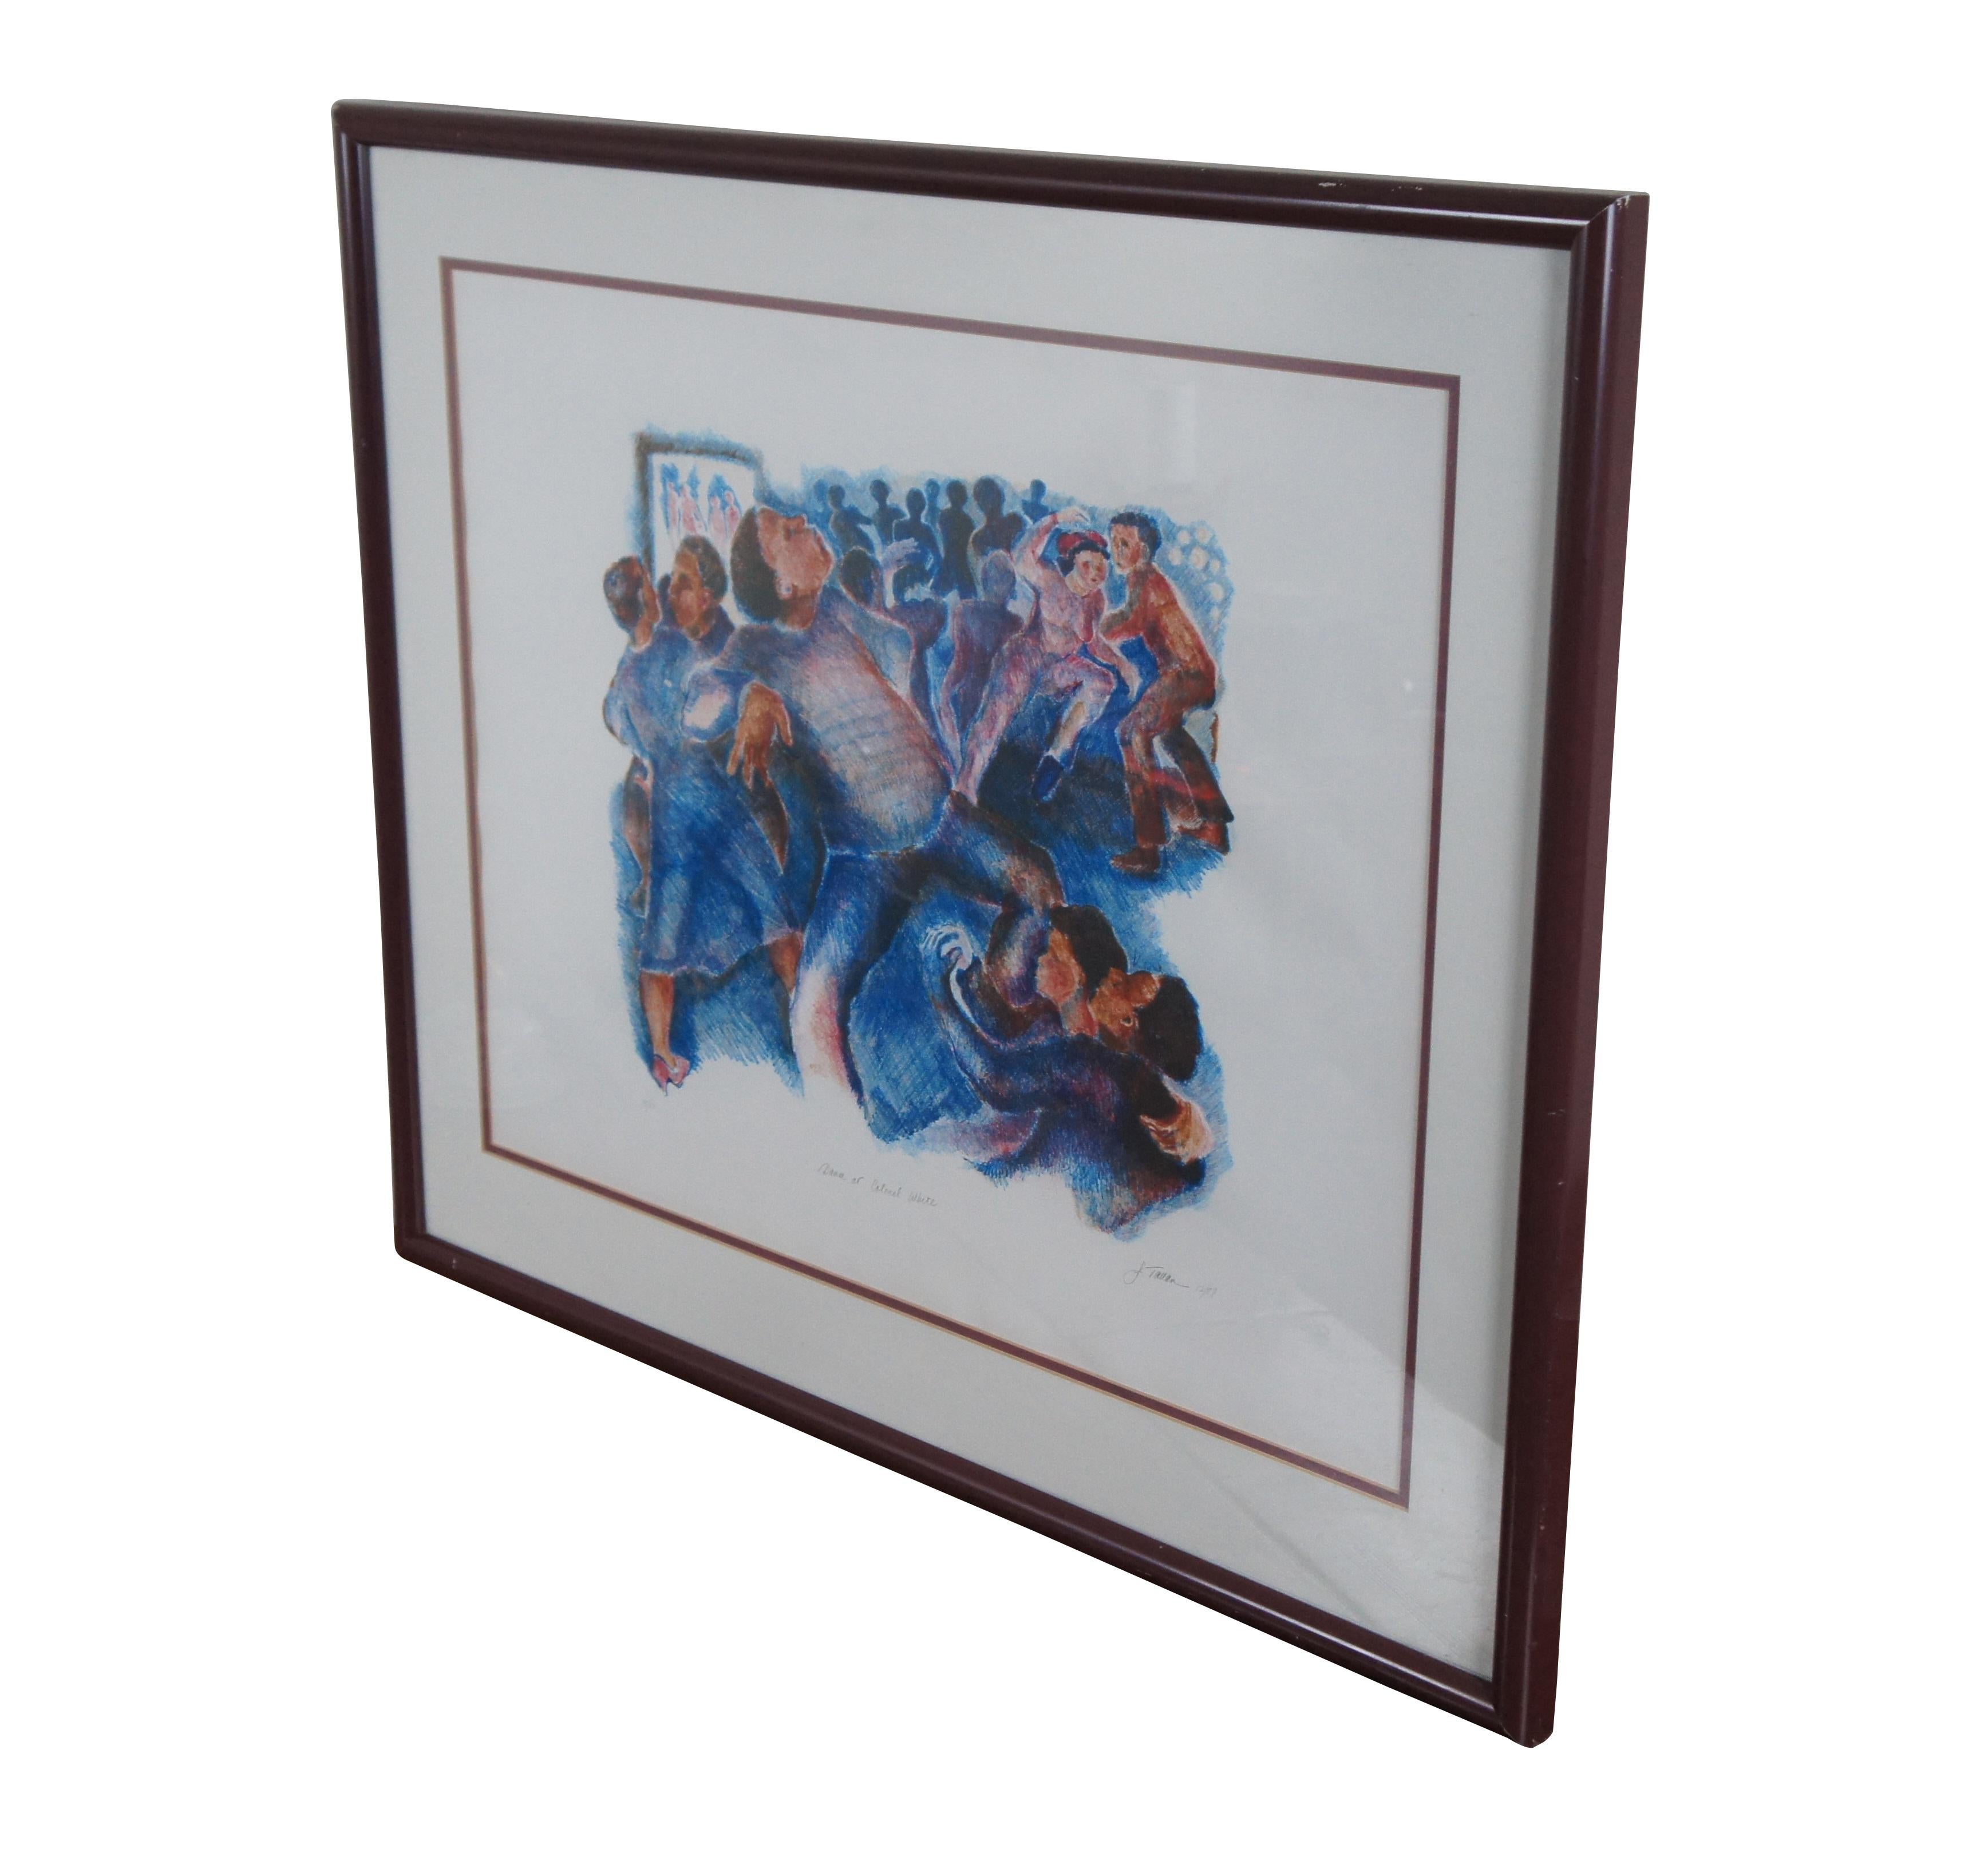 Rare vintage Dance at Colonel White pencil signed lithograph print showing figures dancing in a crowded hall. Pencil signed, dated, titled and numbered along lower edge - J. Tallan 1987, 10/10. Rounded burgundy plastic frame; white and burgundy